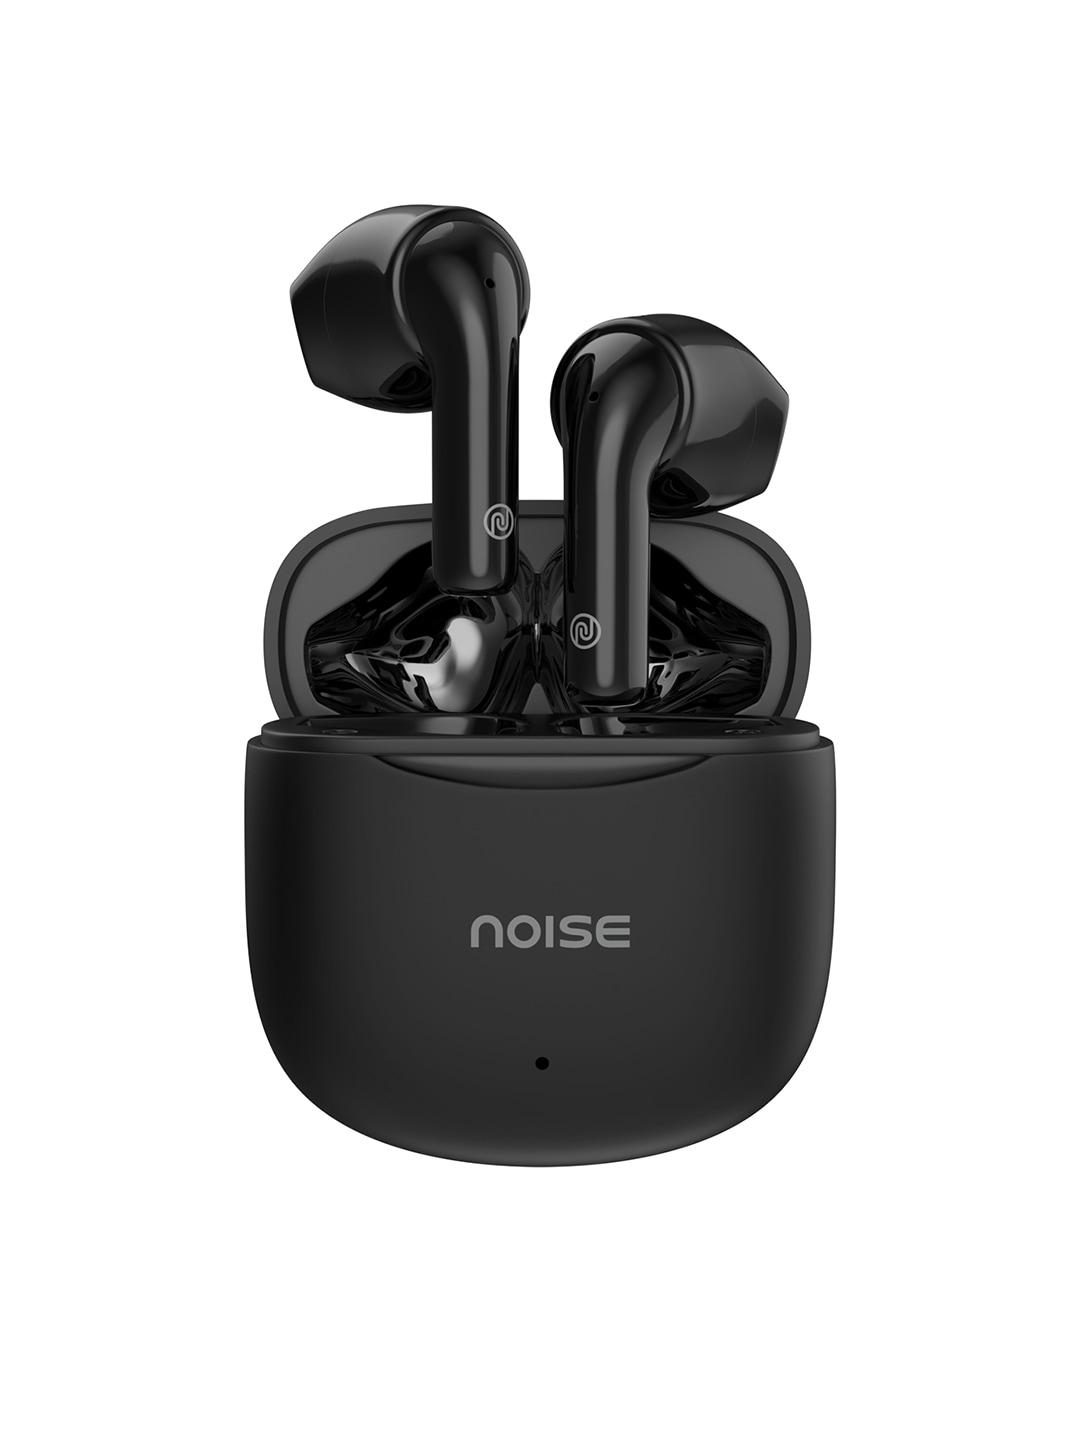 noise-air-buds-mini-truly-wireless-earbuds-with-50hrs-playtime-&-quad-mic-enc---jet-black